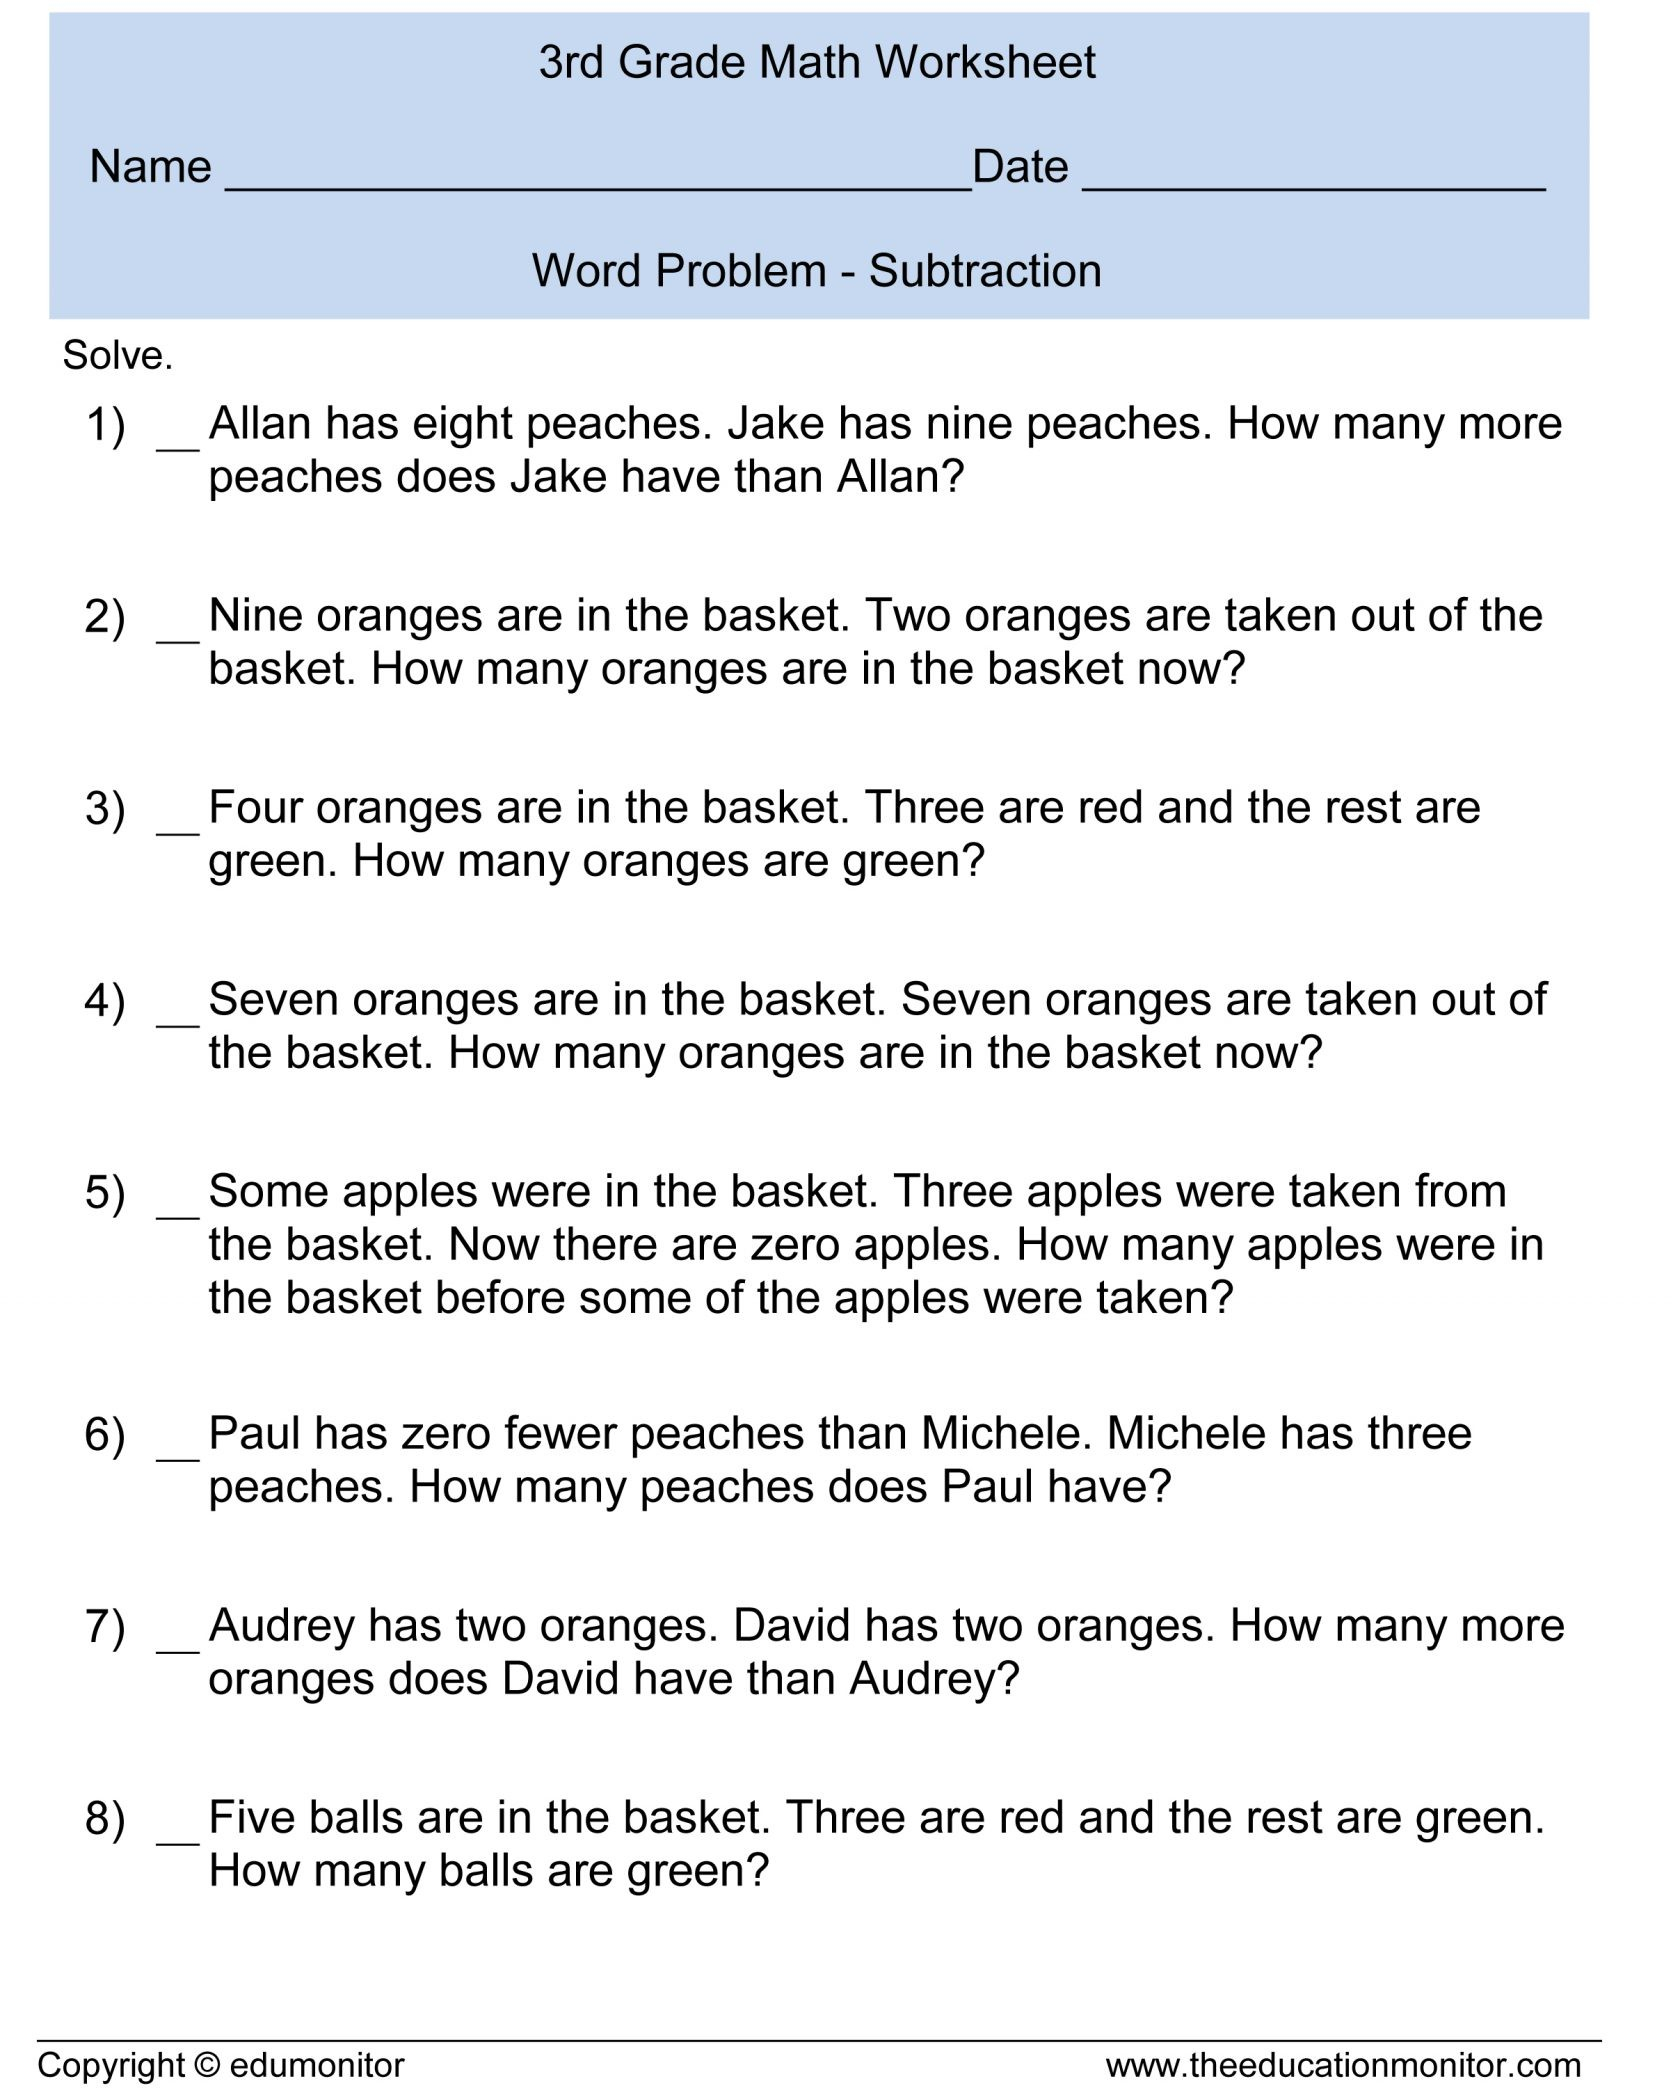 money-word-problems-addition-and-subtraction-money-word-problems-subtraction-word-problems